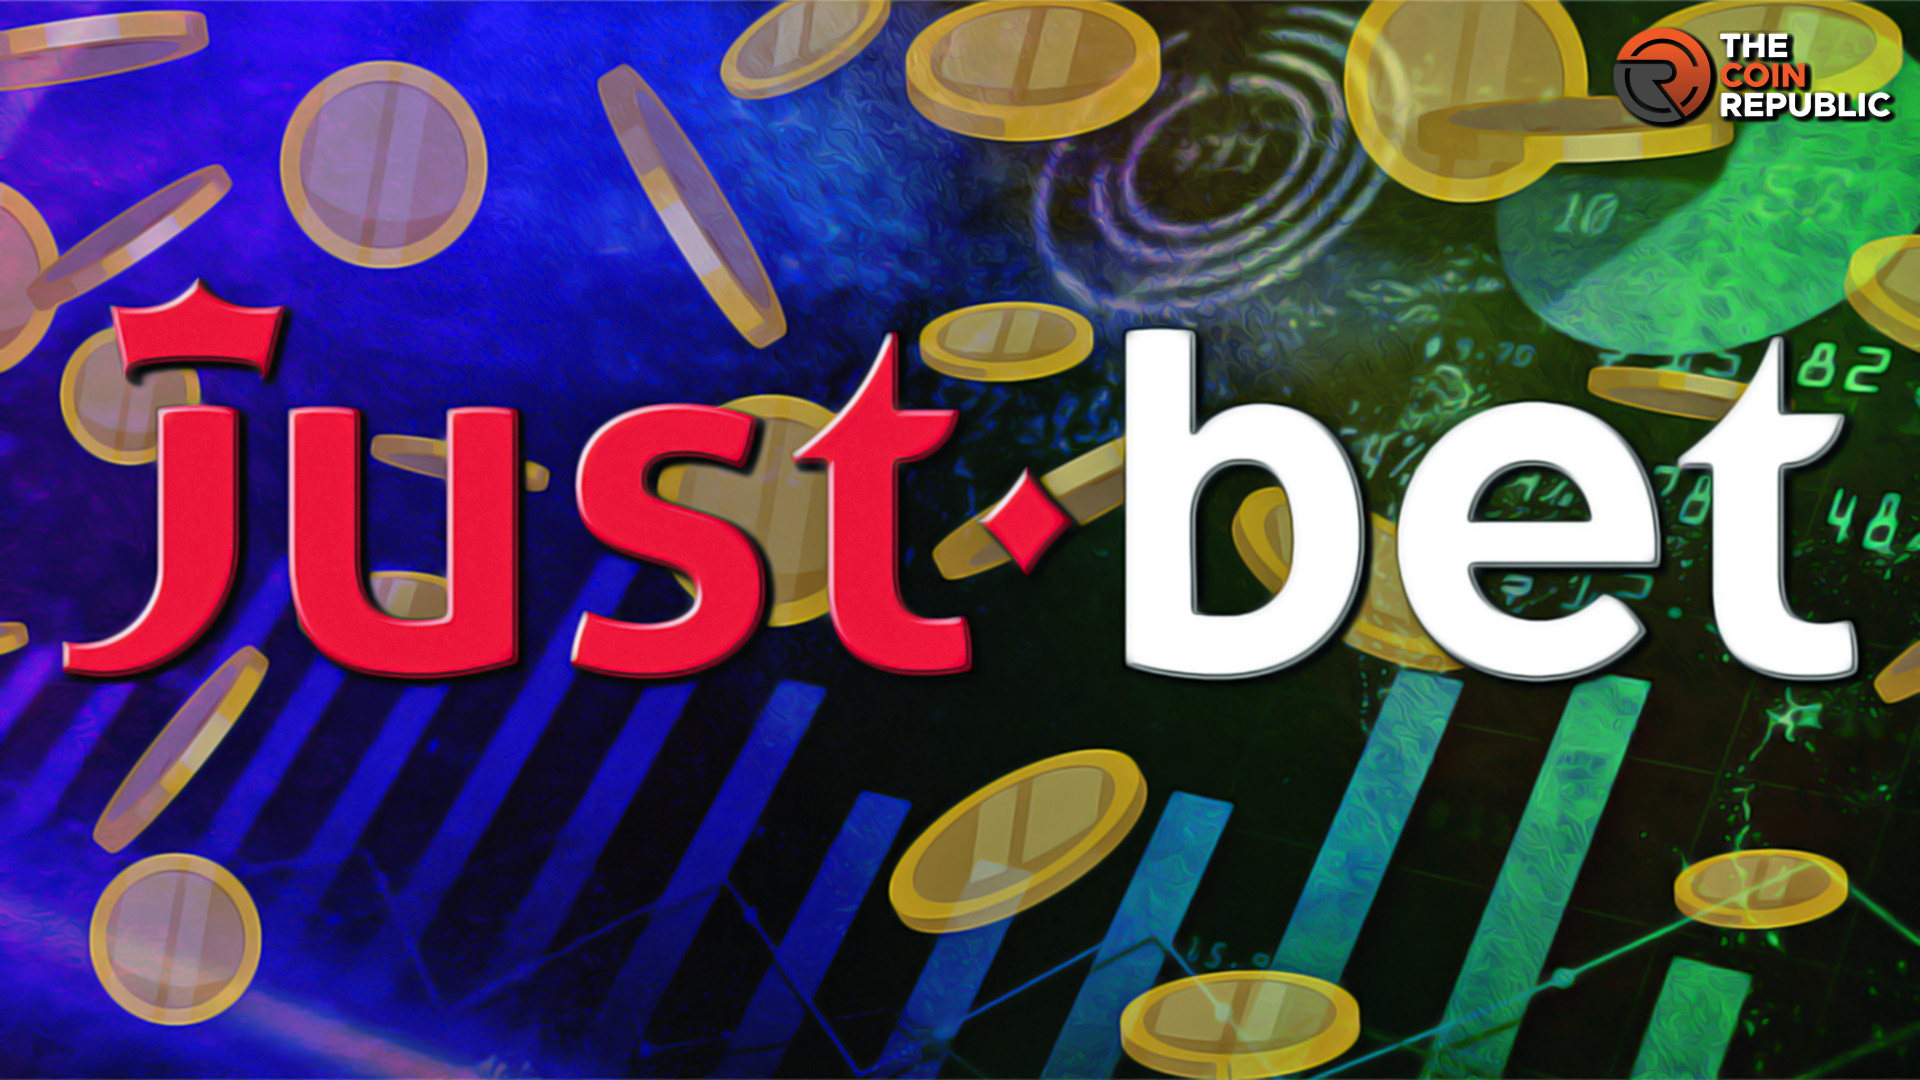 JustBet: Decentralized Gambling Platform for Good Experience